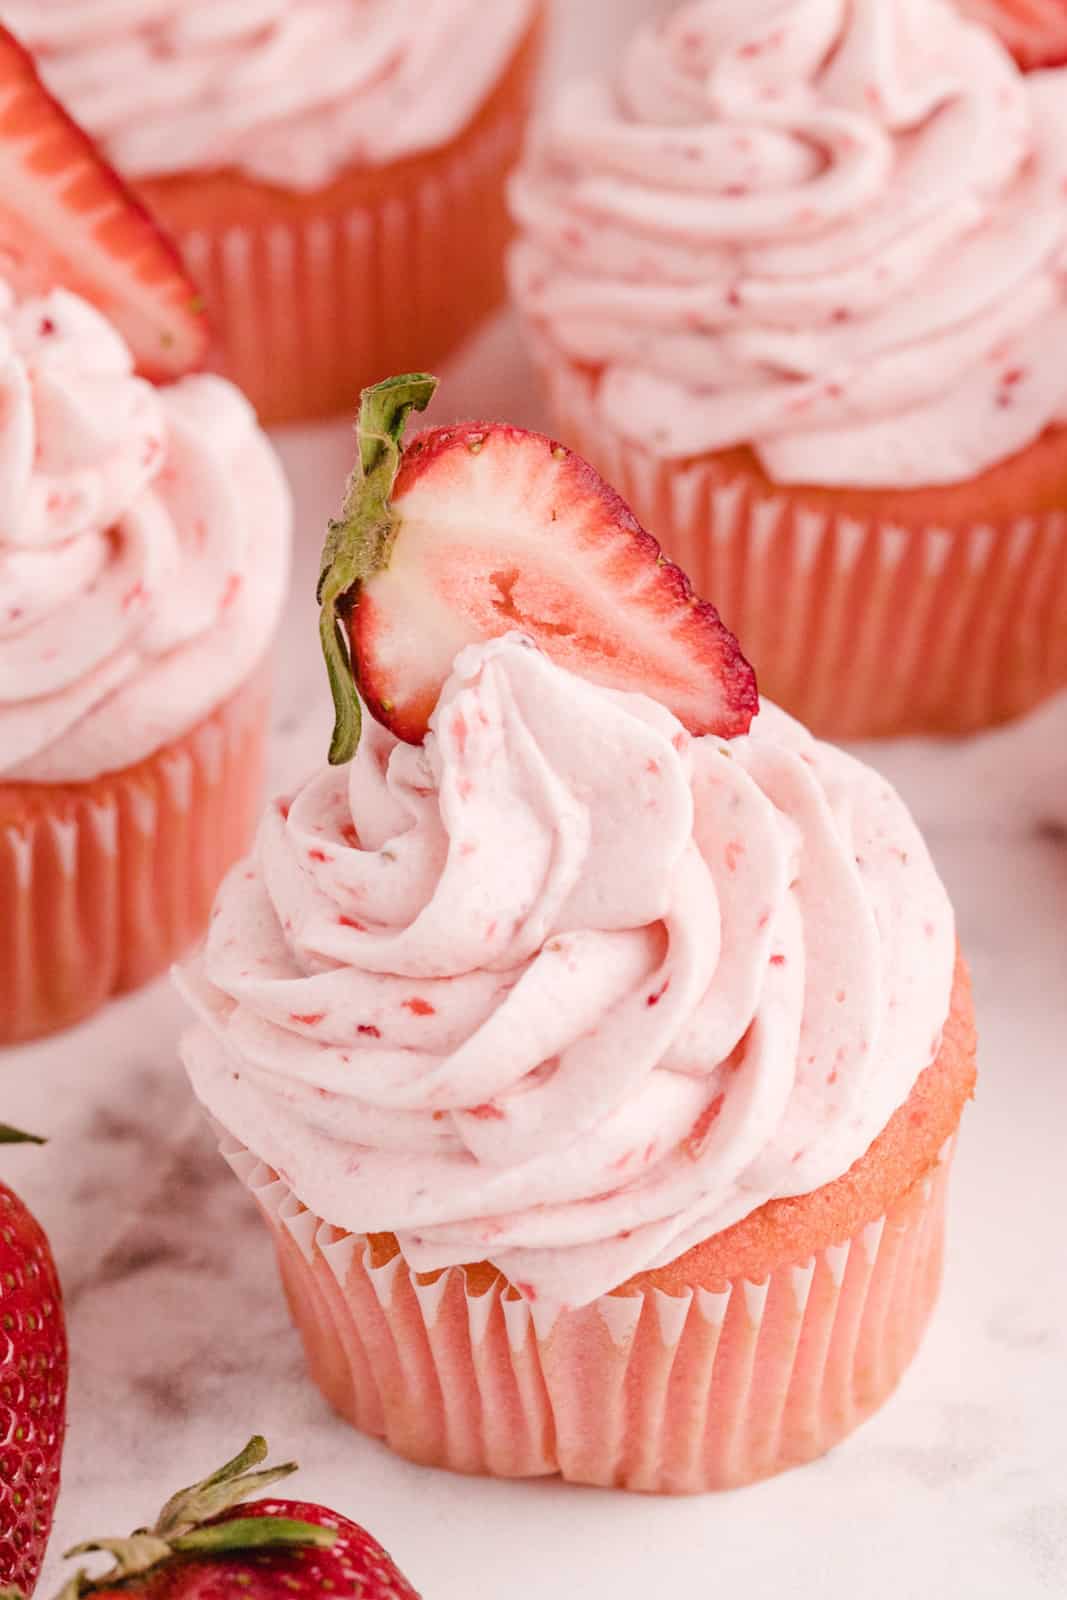 Closeup of one cupcake topped with strawberry slice